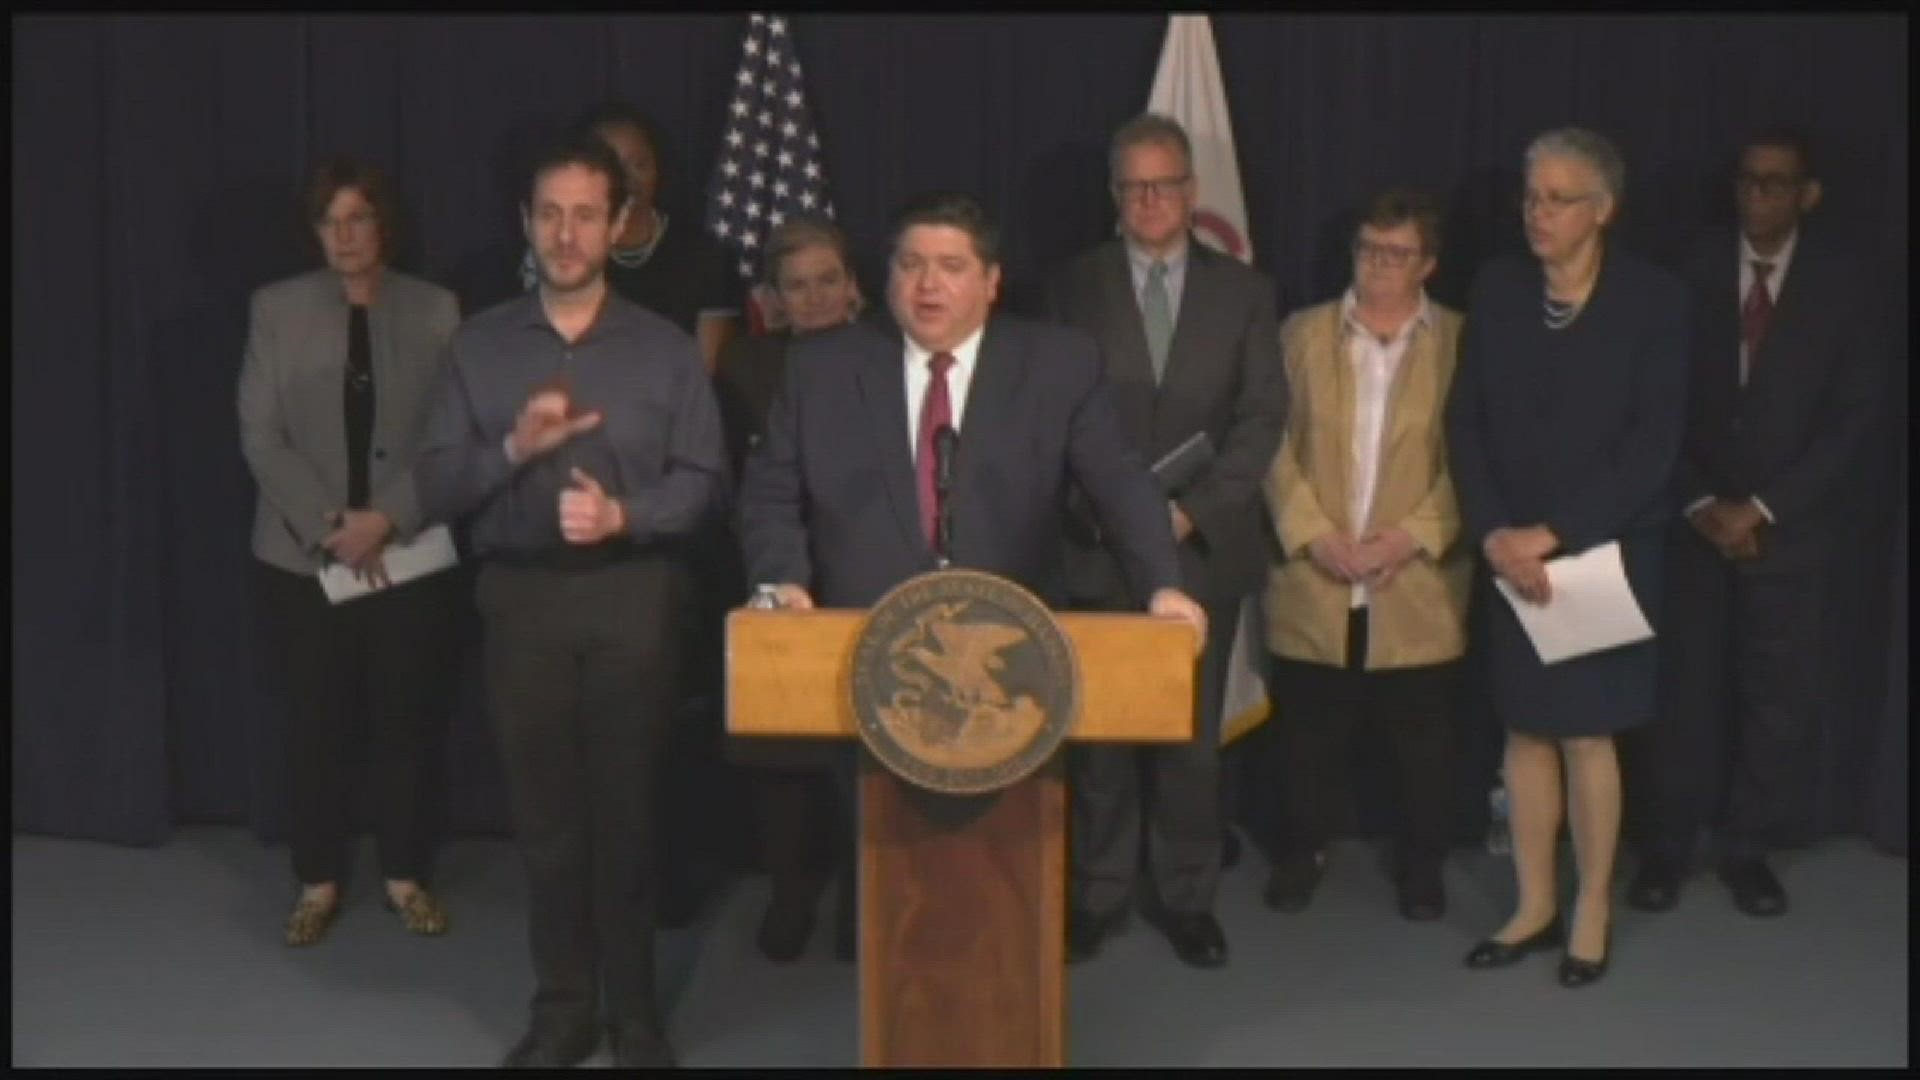 Eleven people in Illinois have tested positive for COVID-19, Gov. J.B. Pritzker confirmed in a news conference from Chicago Monday afternoon.